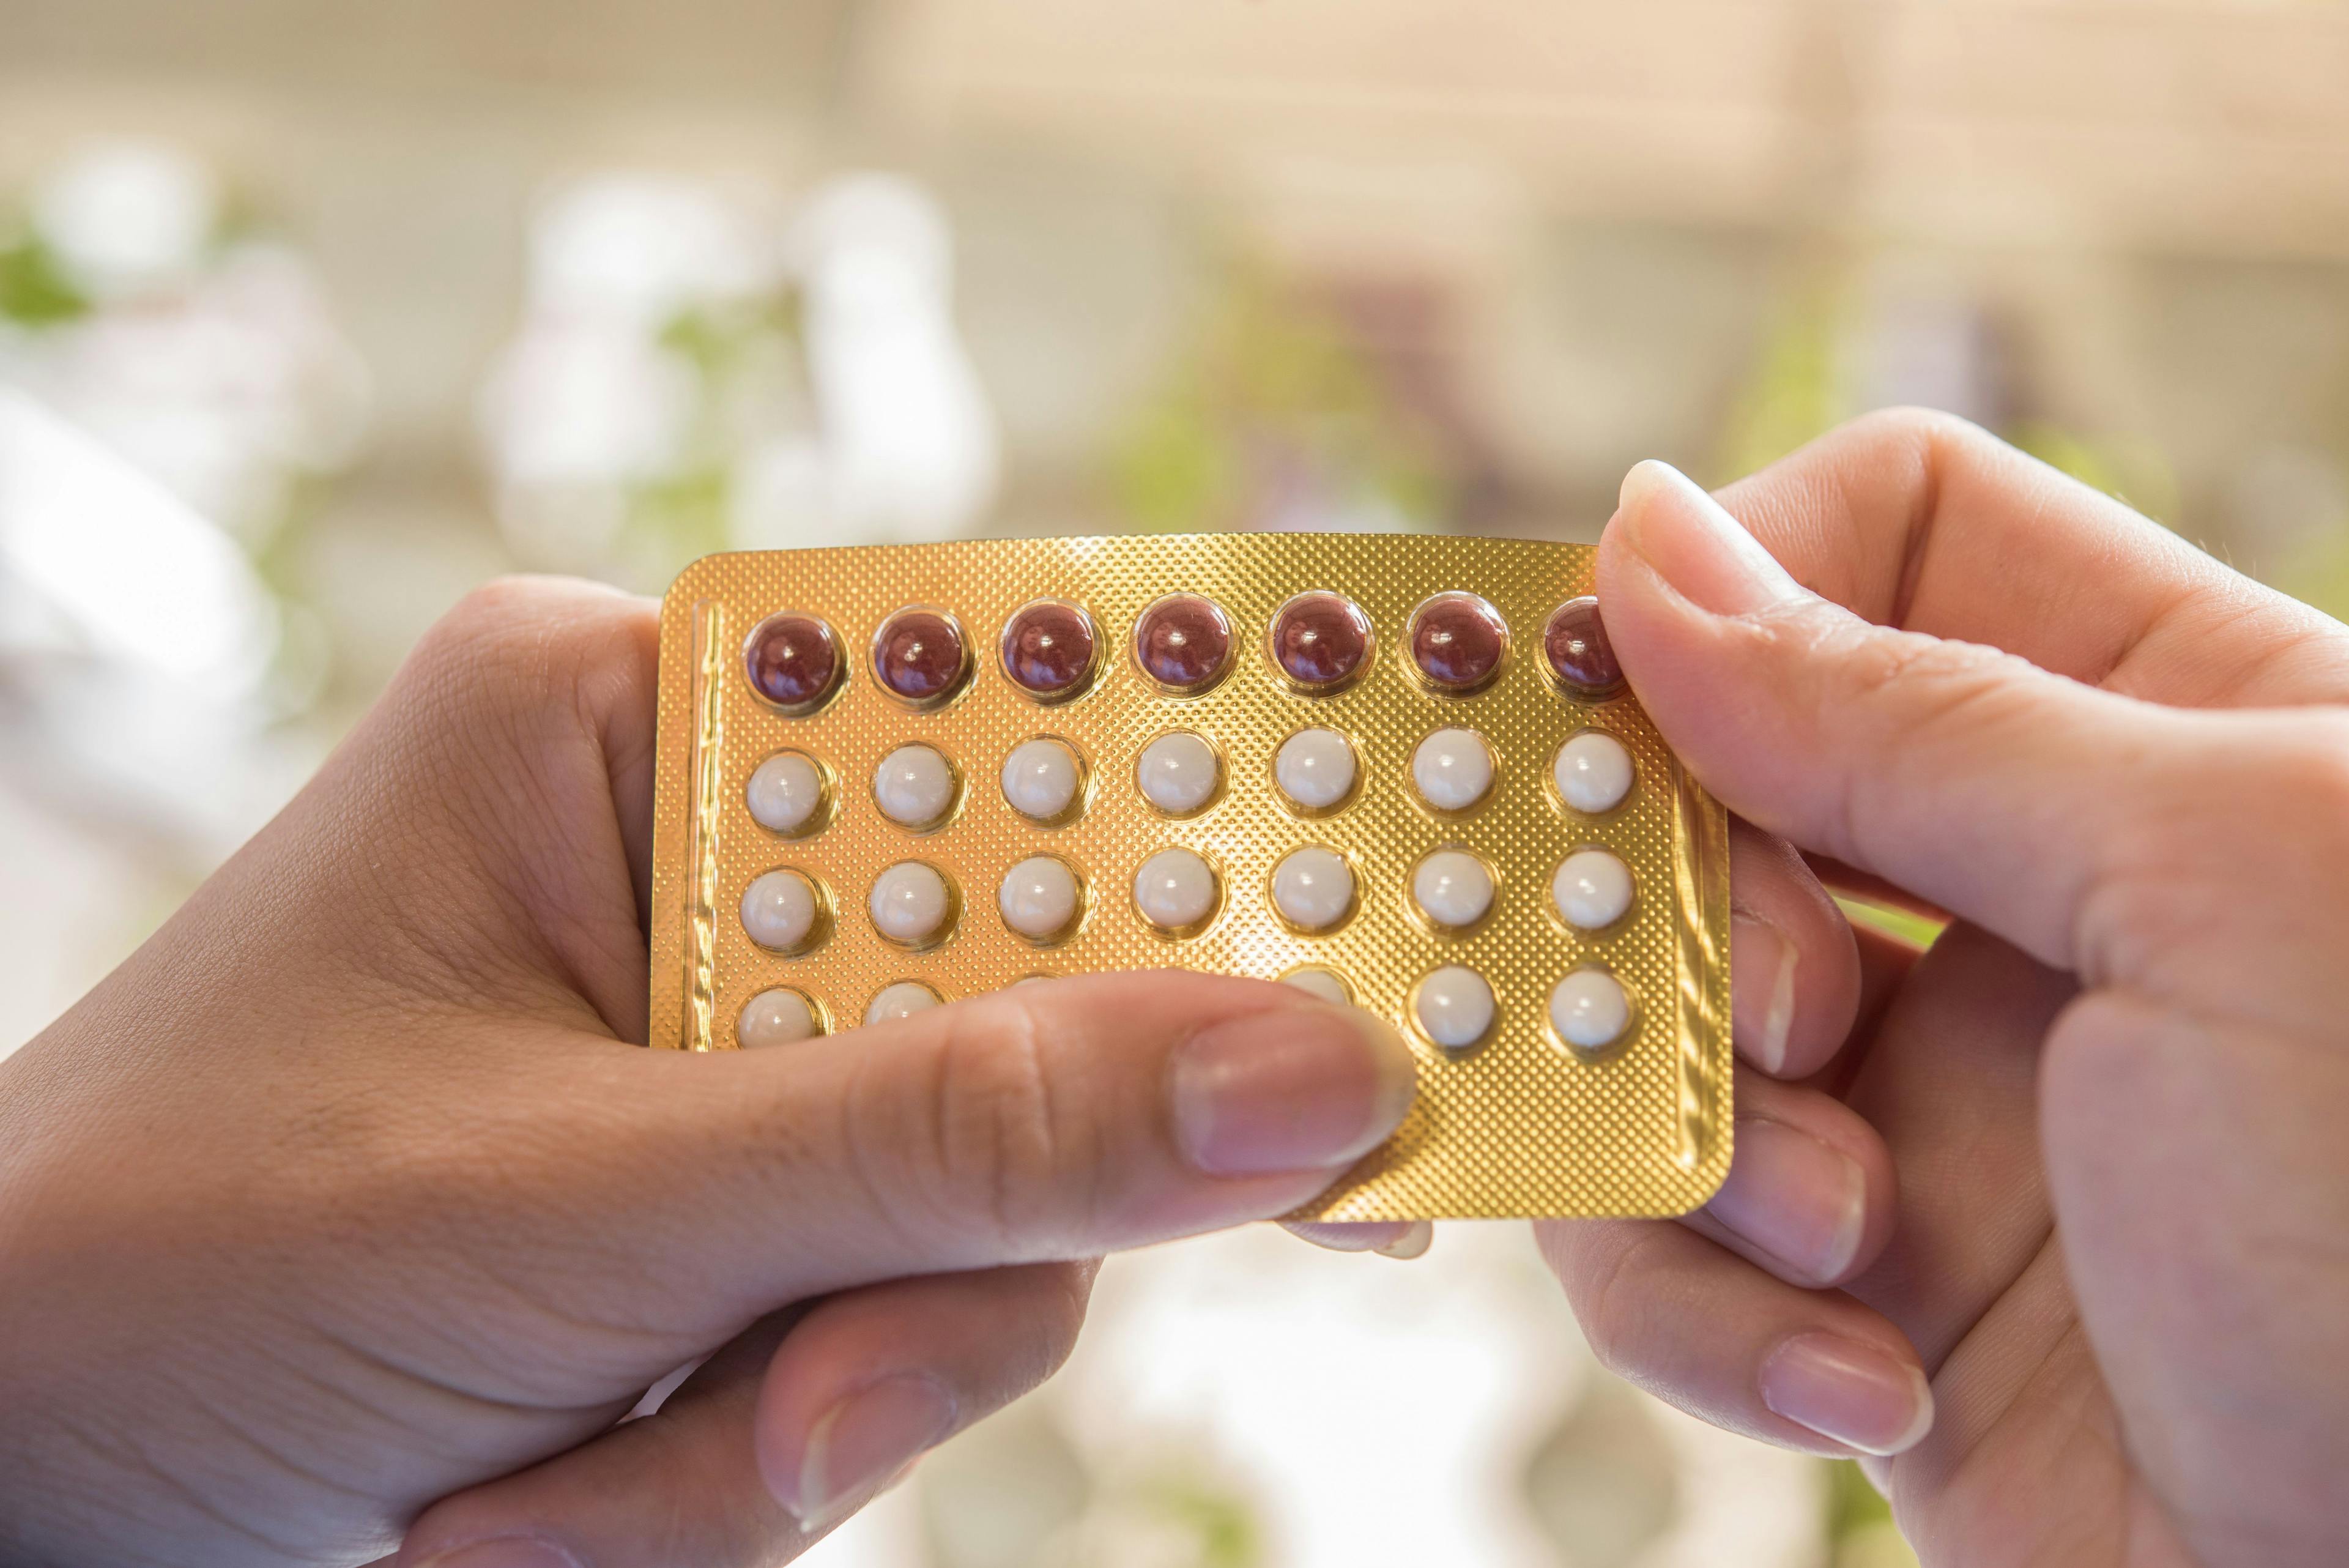 Increasing access to contraception in the United States